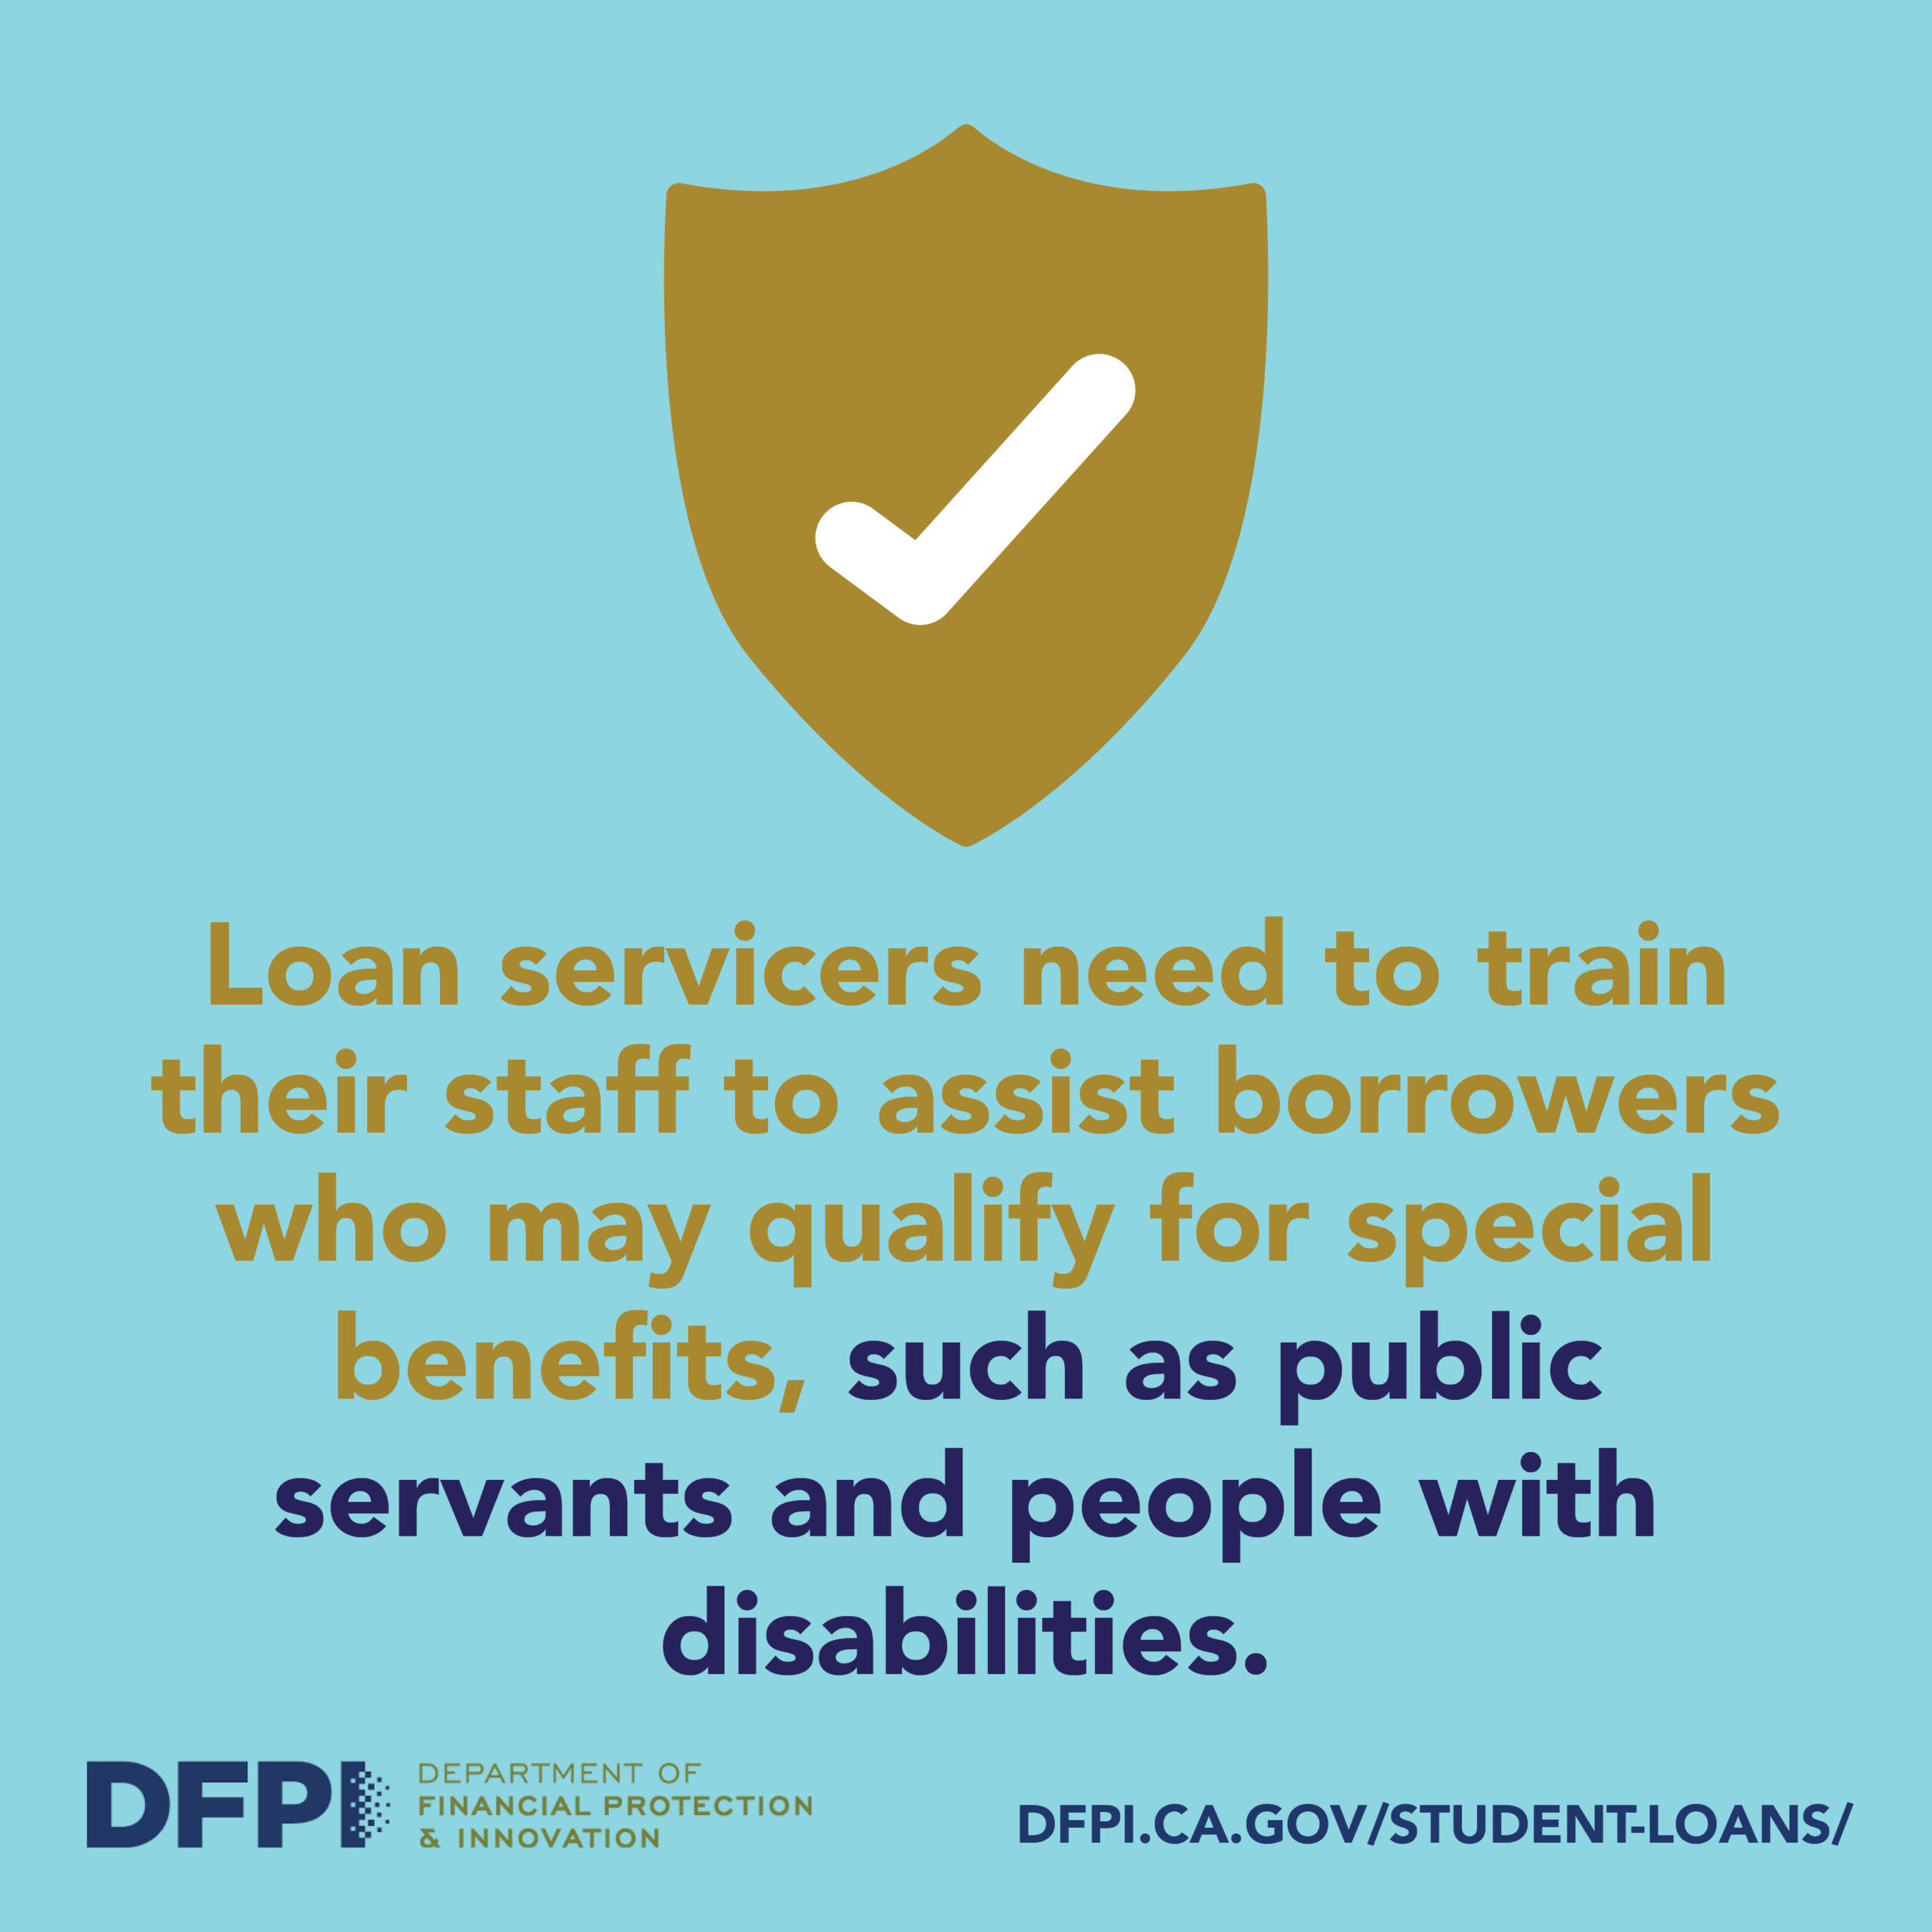 Loan servicers must train their staff